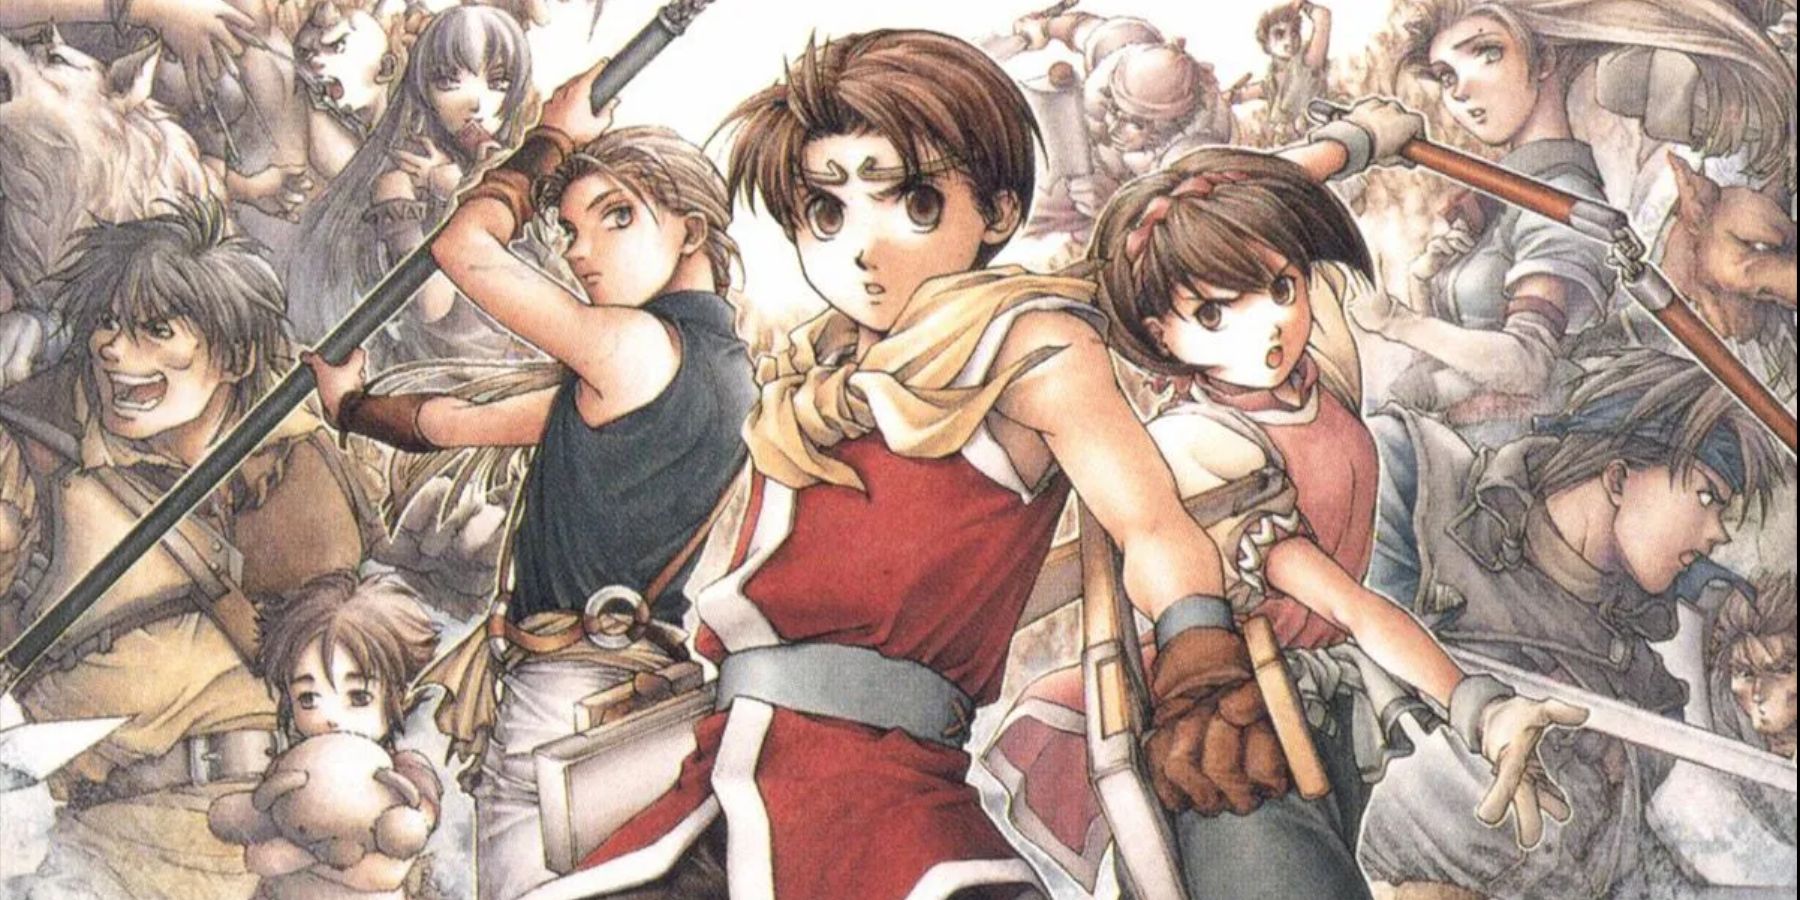 Suikoden 2 protagonist, Joei, nanami, Clive and 108 Star of Destiny